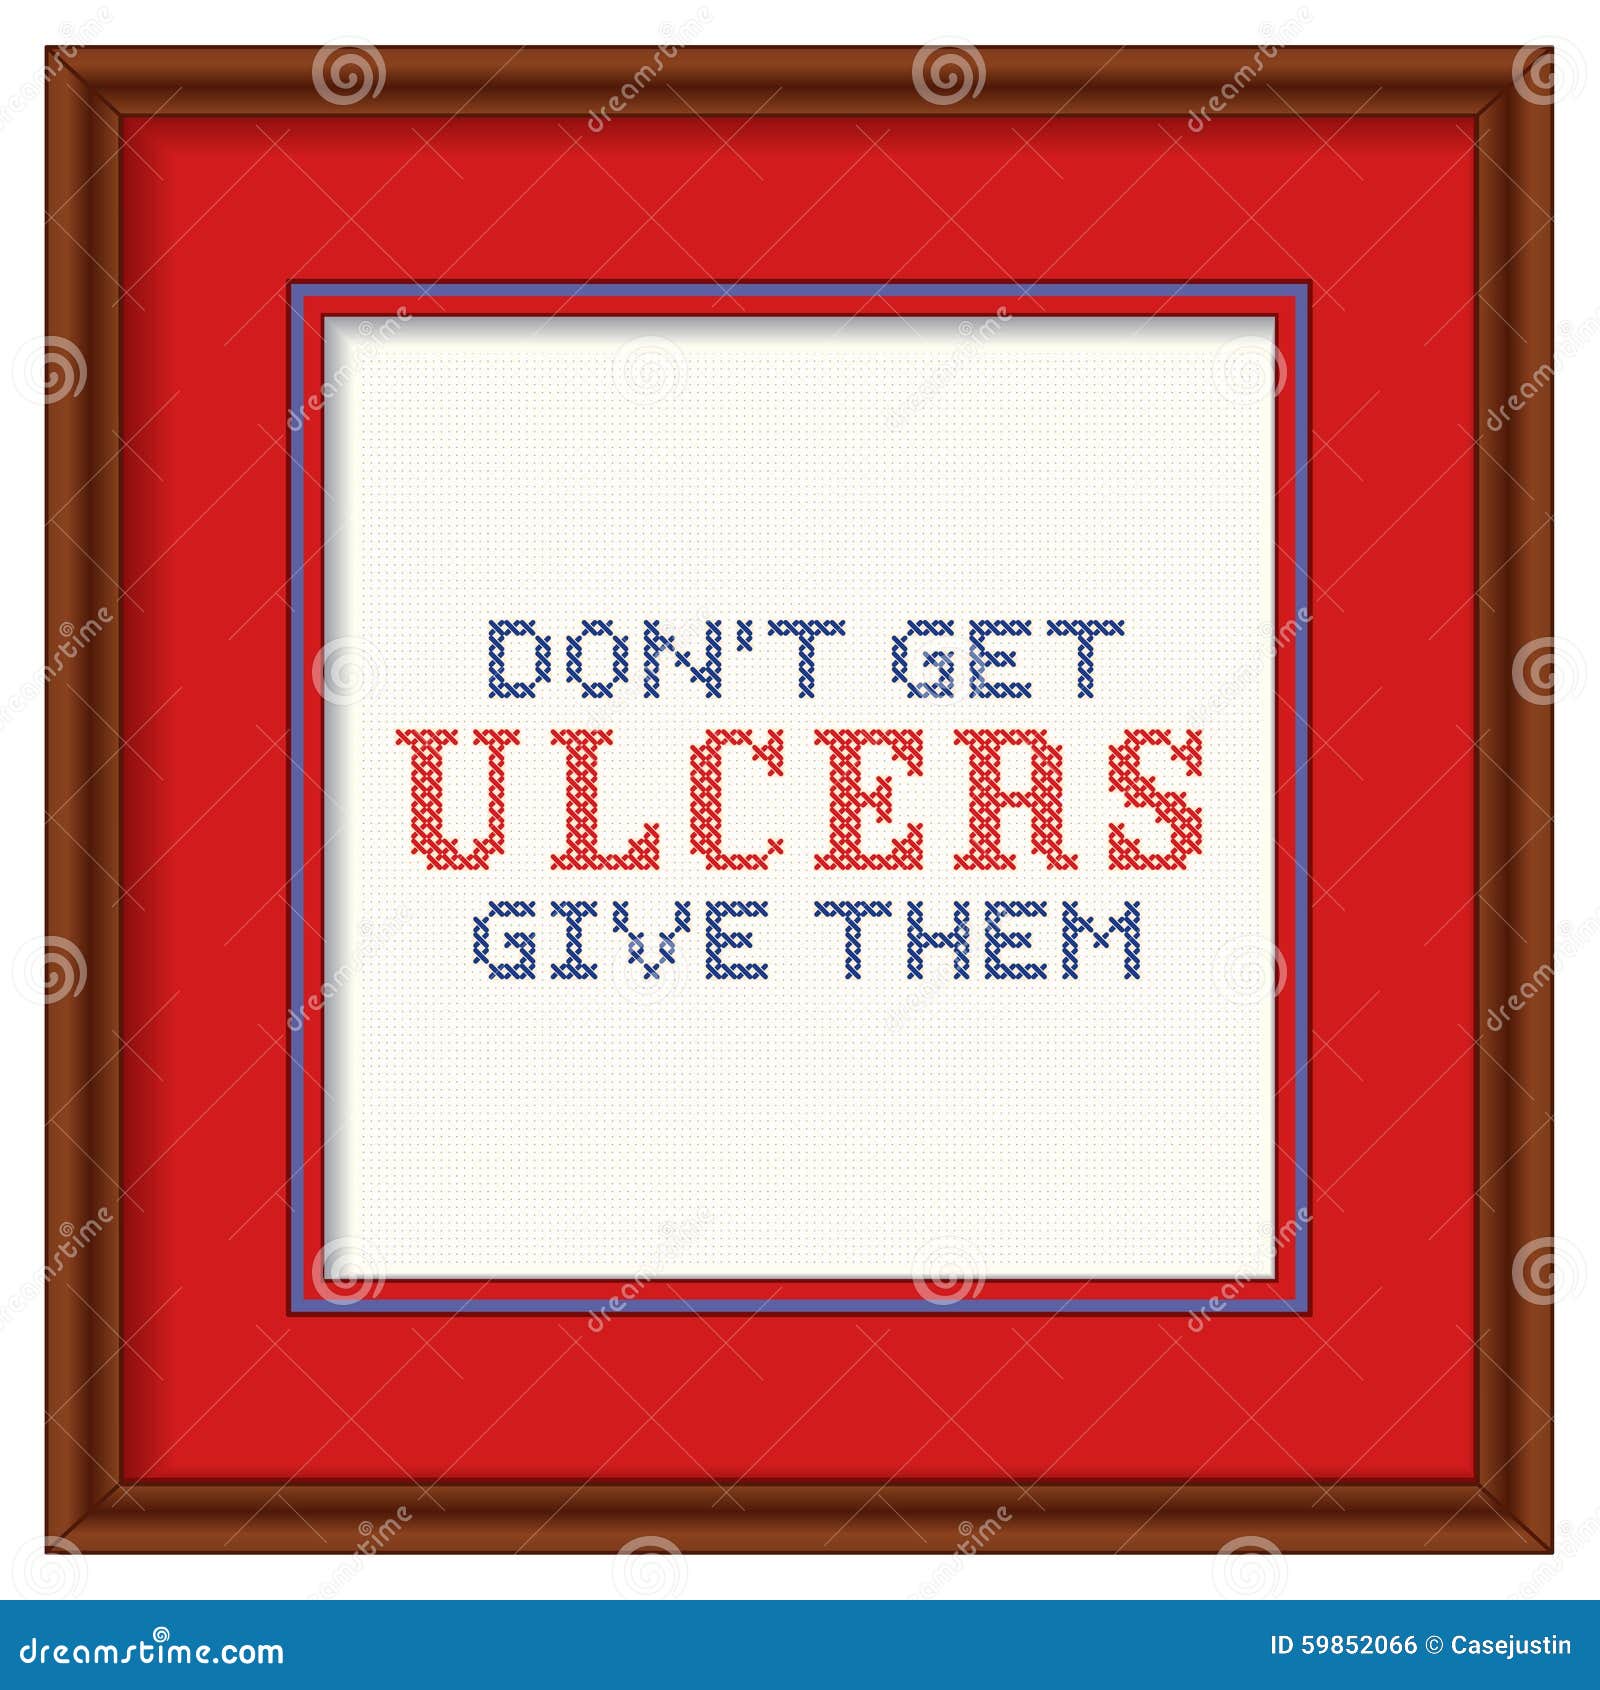 dont get ulcers, give them cross stitch embroidery on frame